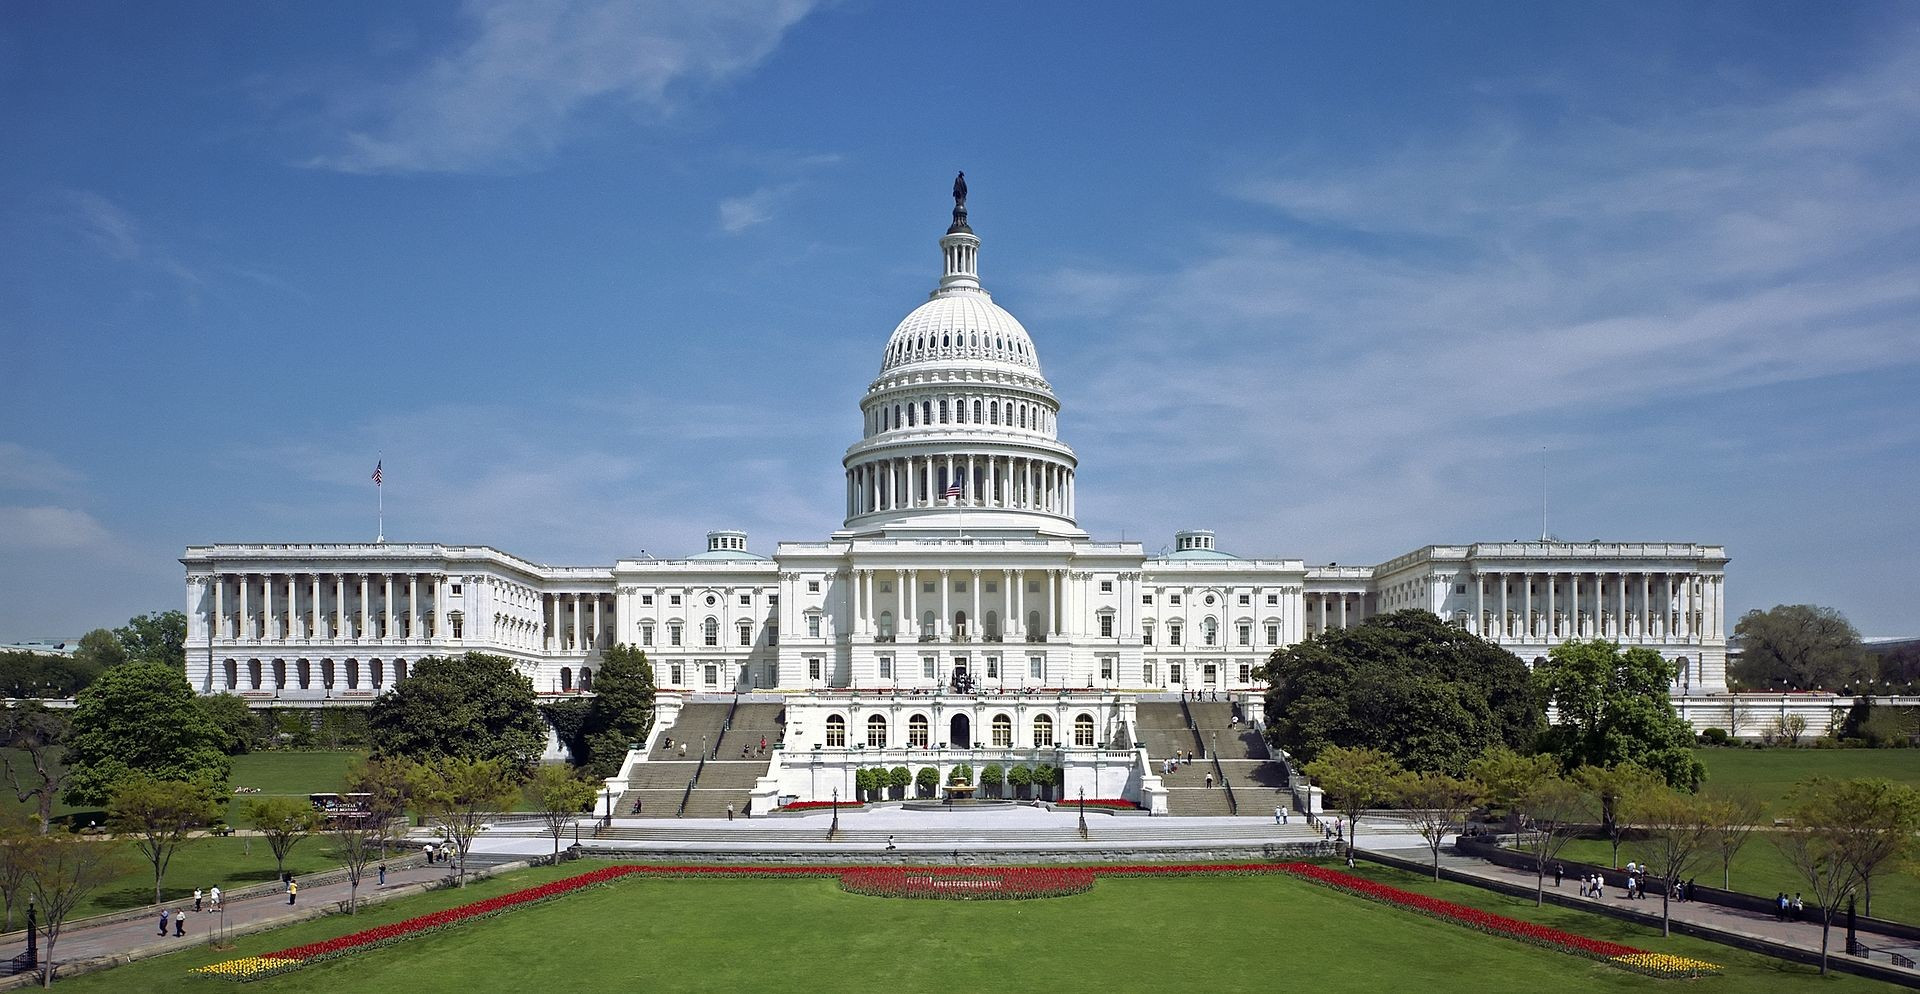 Автор: United_States_Capitol_-_west_front.jpg: Architect of the Capitolderivative work: O.J. - United_States_Capitol_-_west_front.jpg, Общественное достояние, https://commons.wikimedia.org/w/index.php?curid=17800708